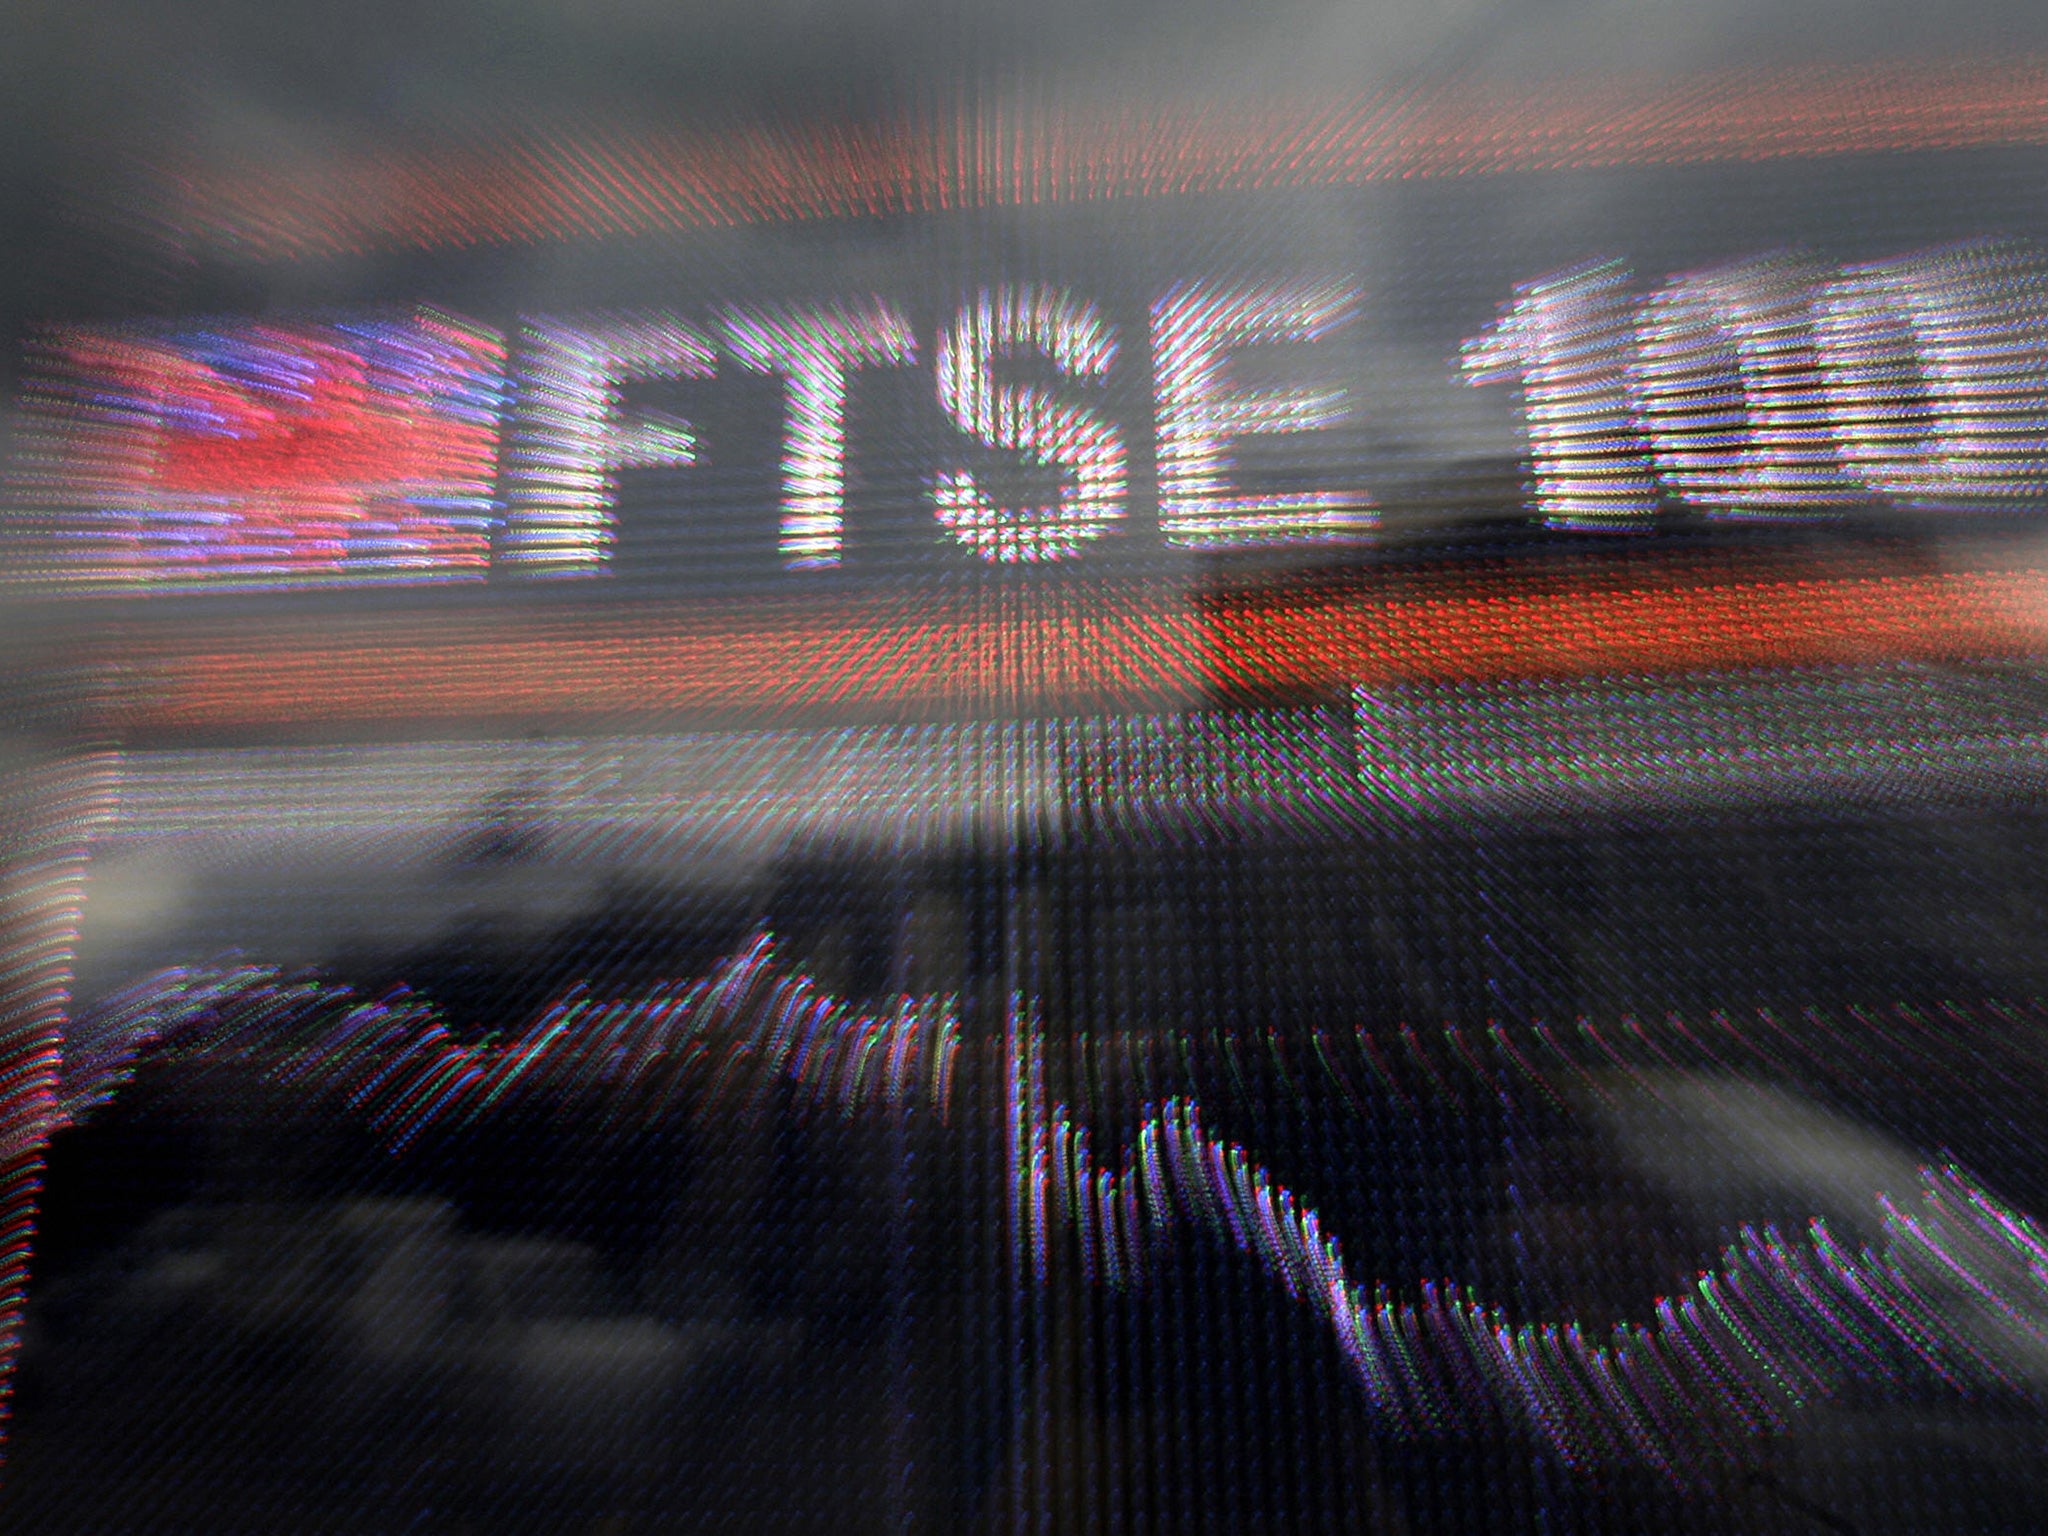 Steady declines on the FTSE 100 quickly turned into another mauling as the blue-chip index slumped by 138.09 points